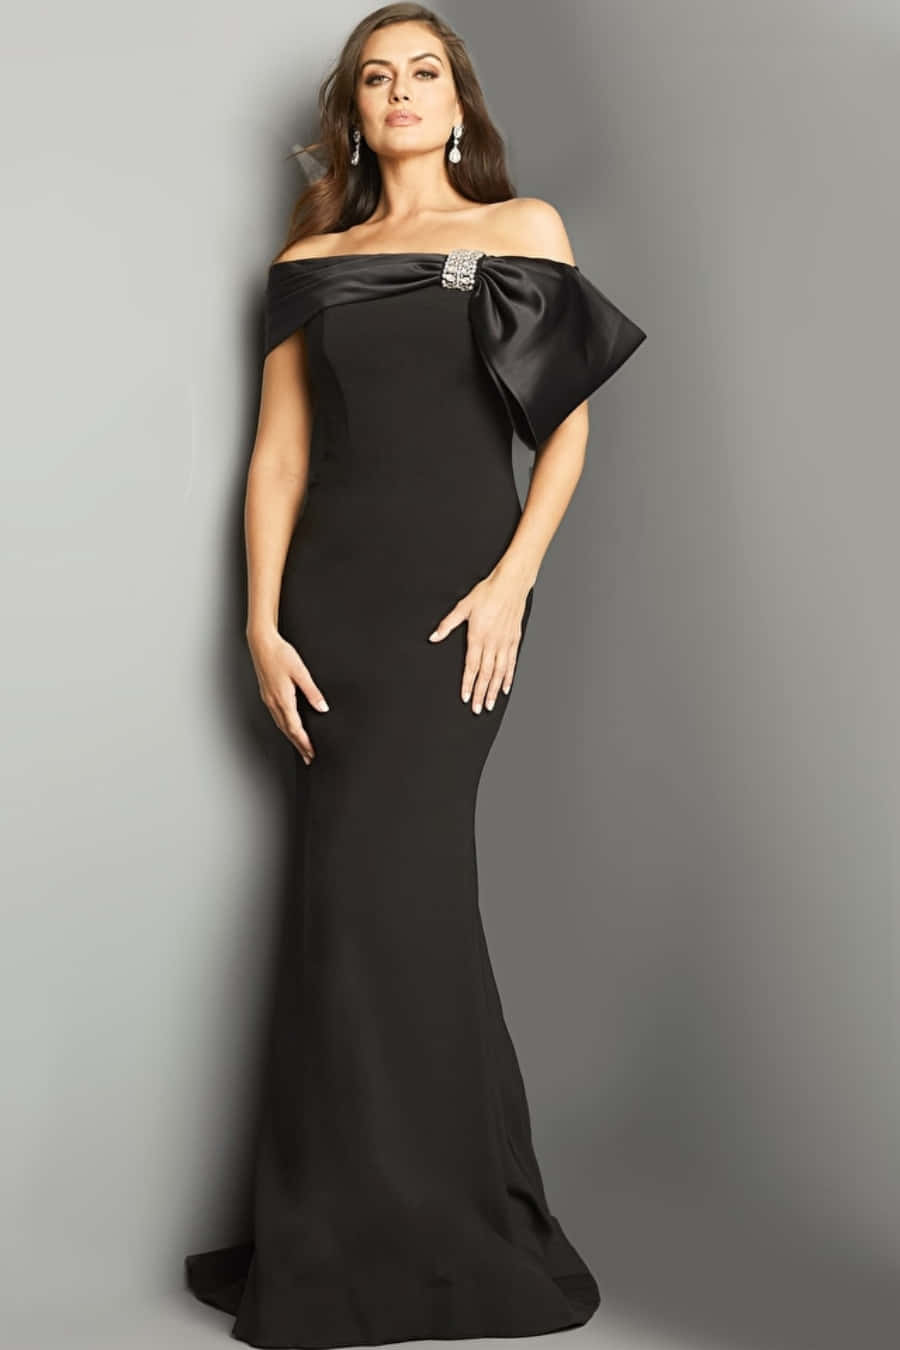 Steal the show in a timelessly elegant black tie dress Wallpaper